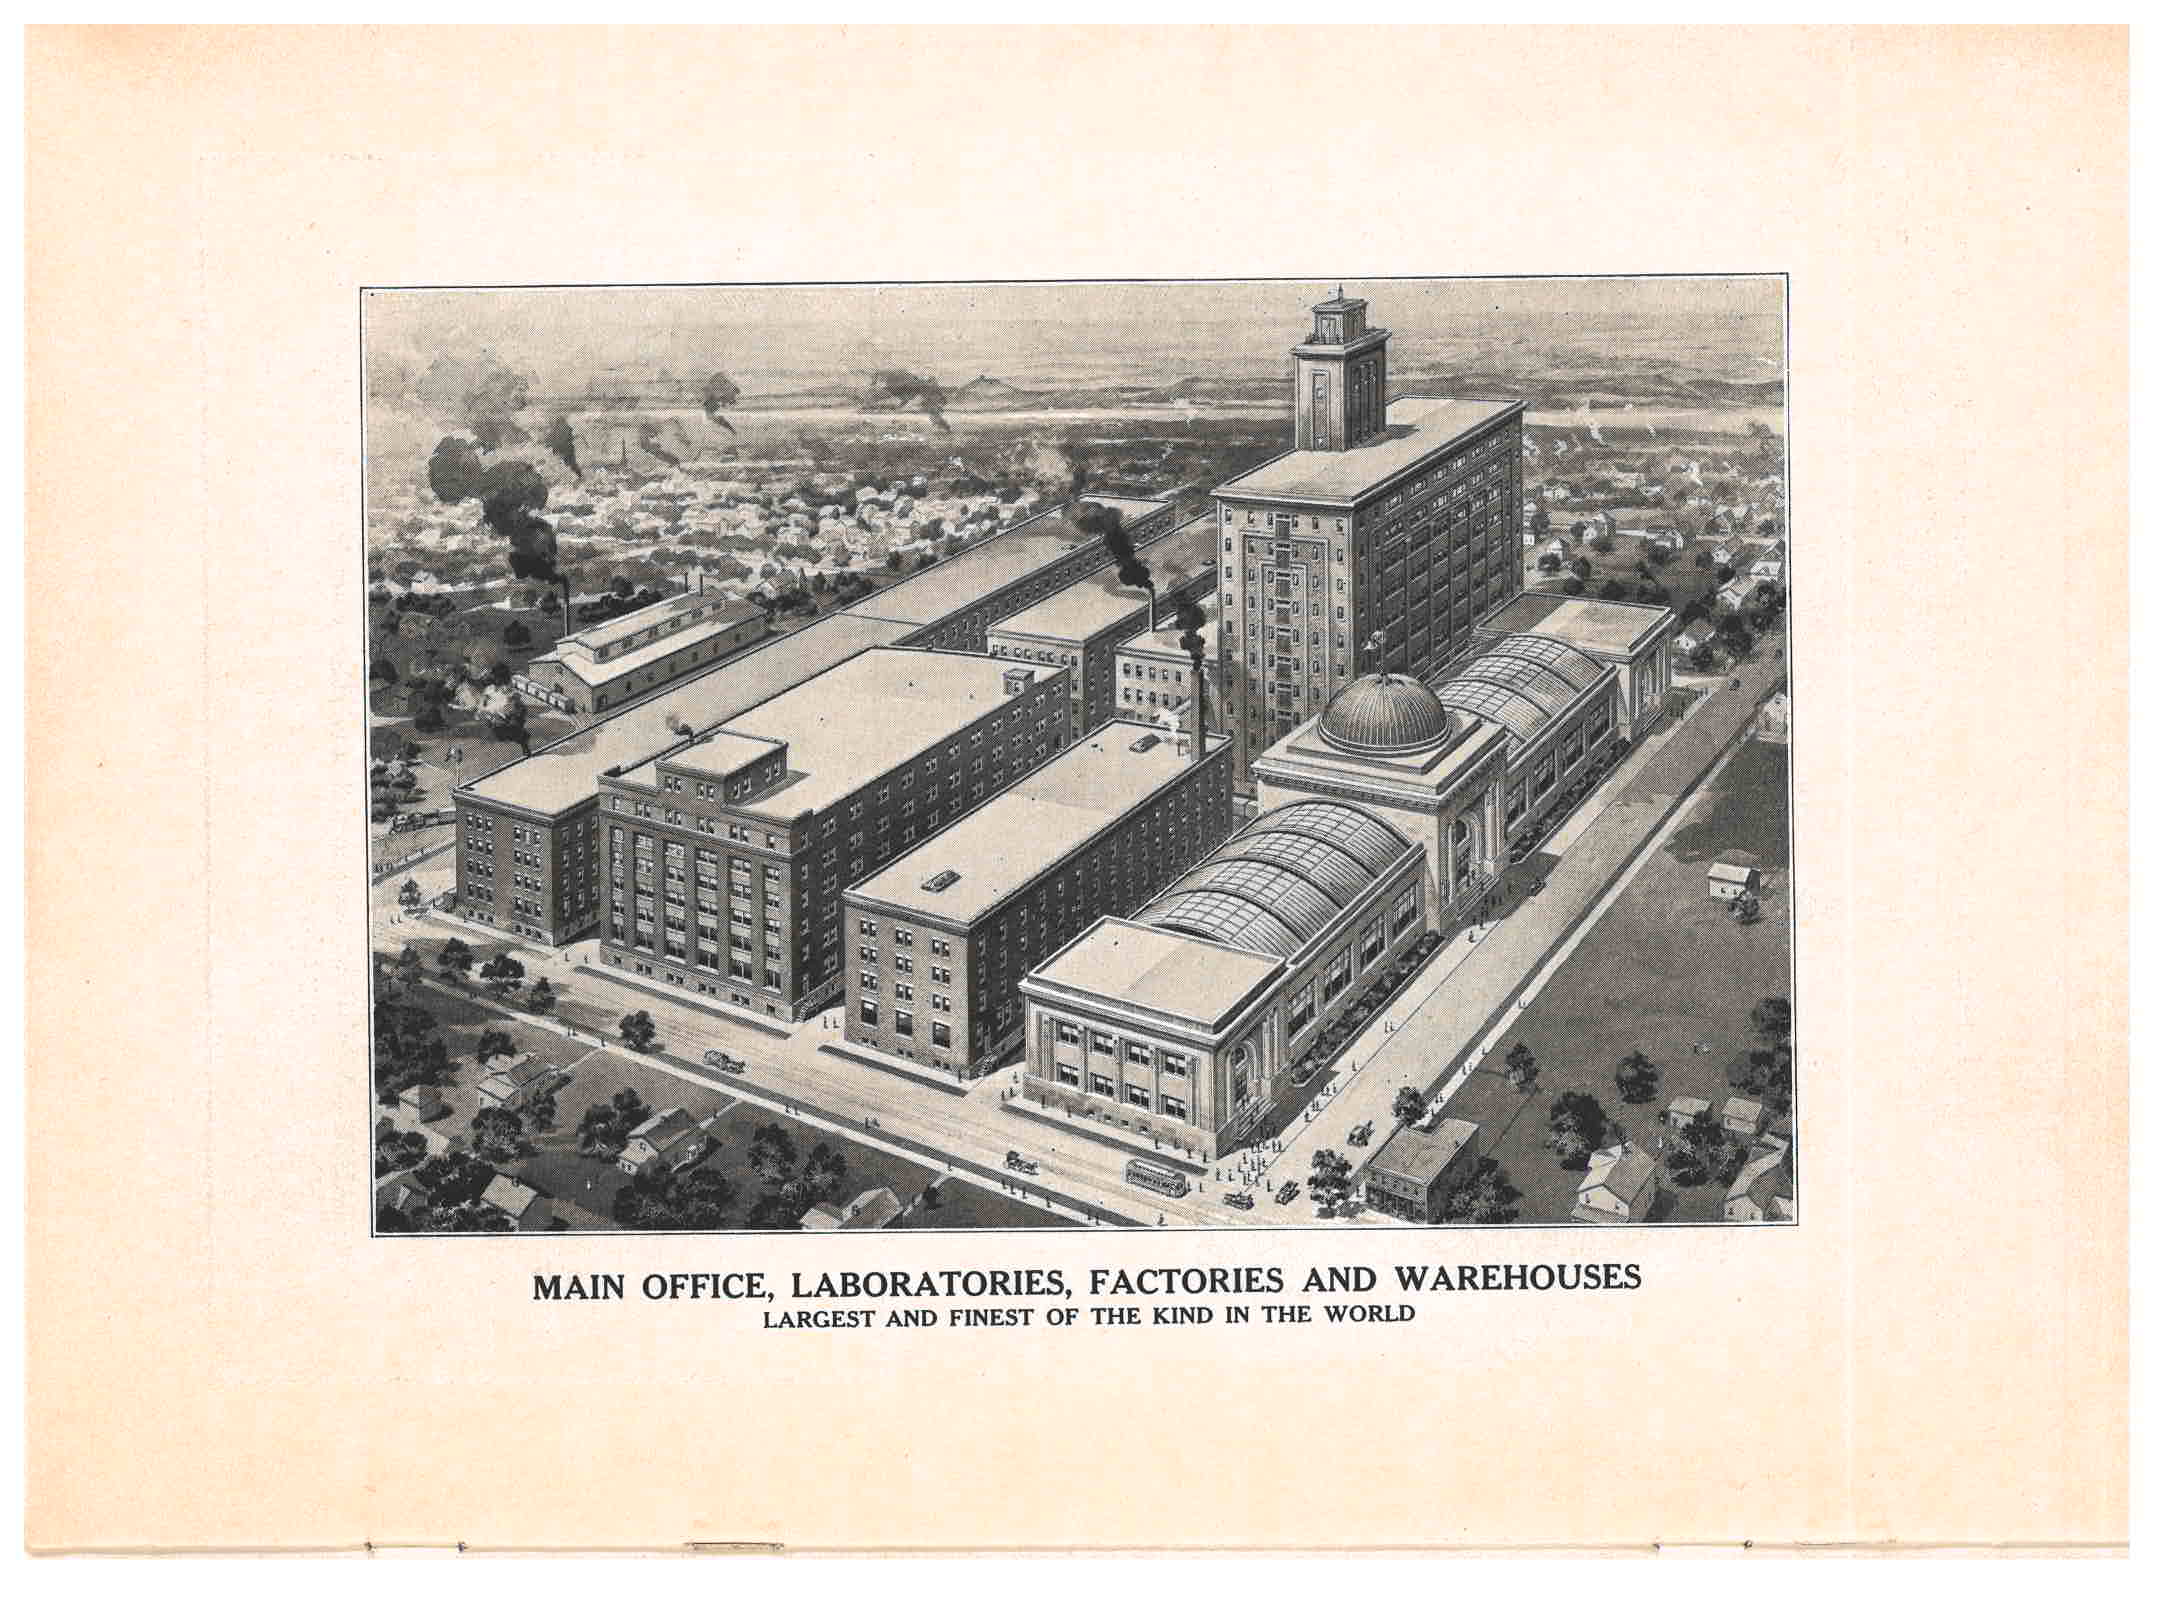 company’s main office, laboratories, factories, and warehouses